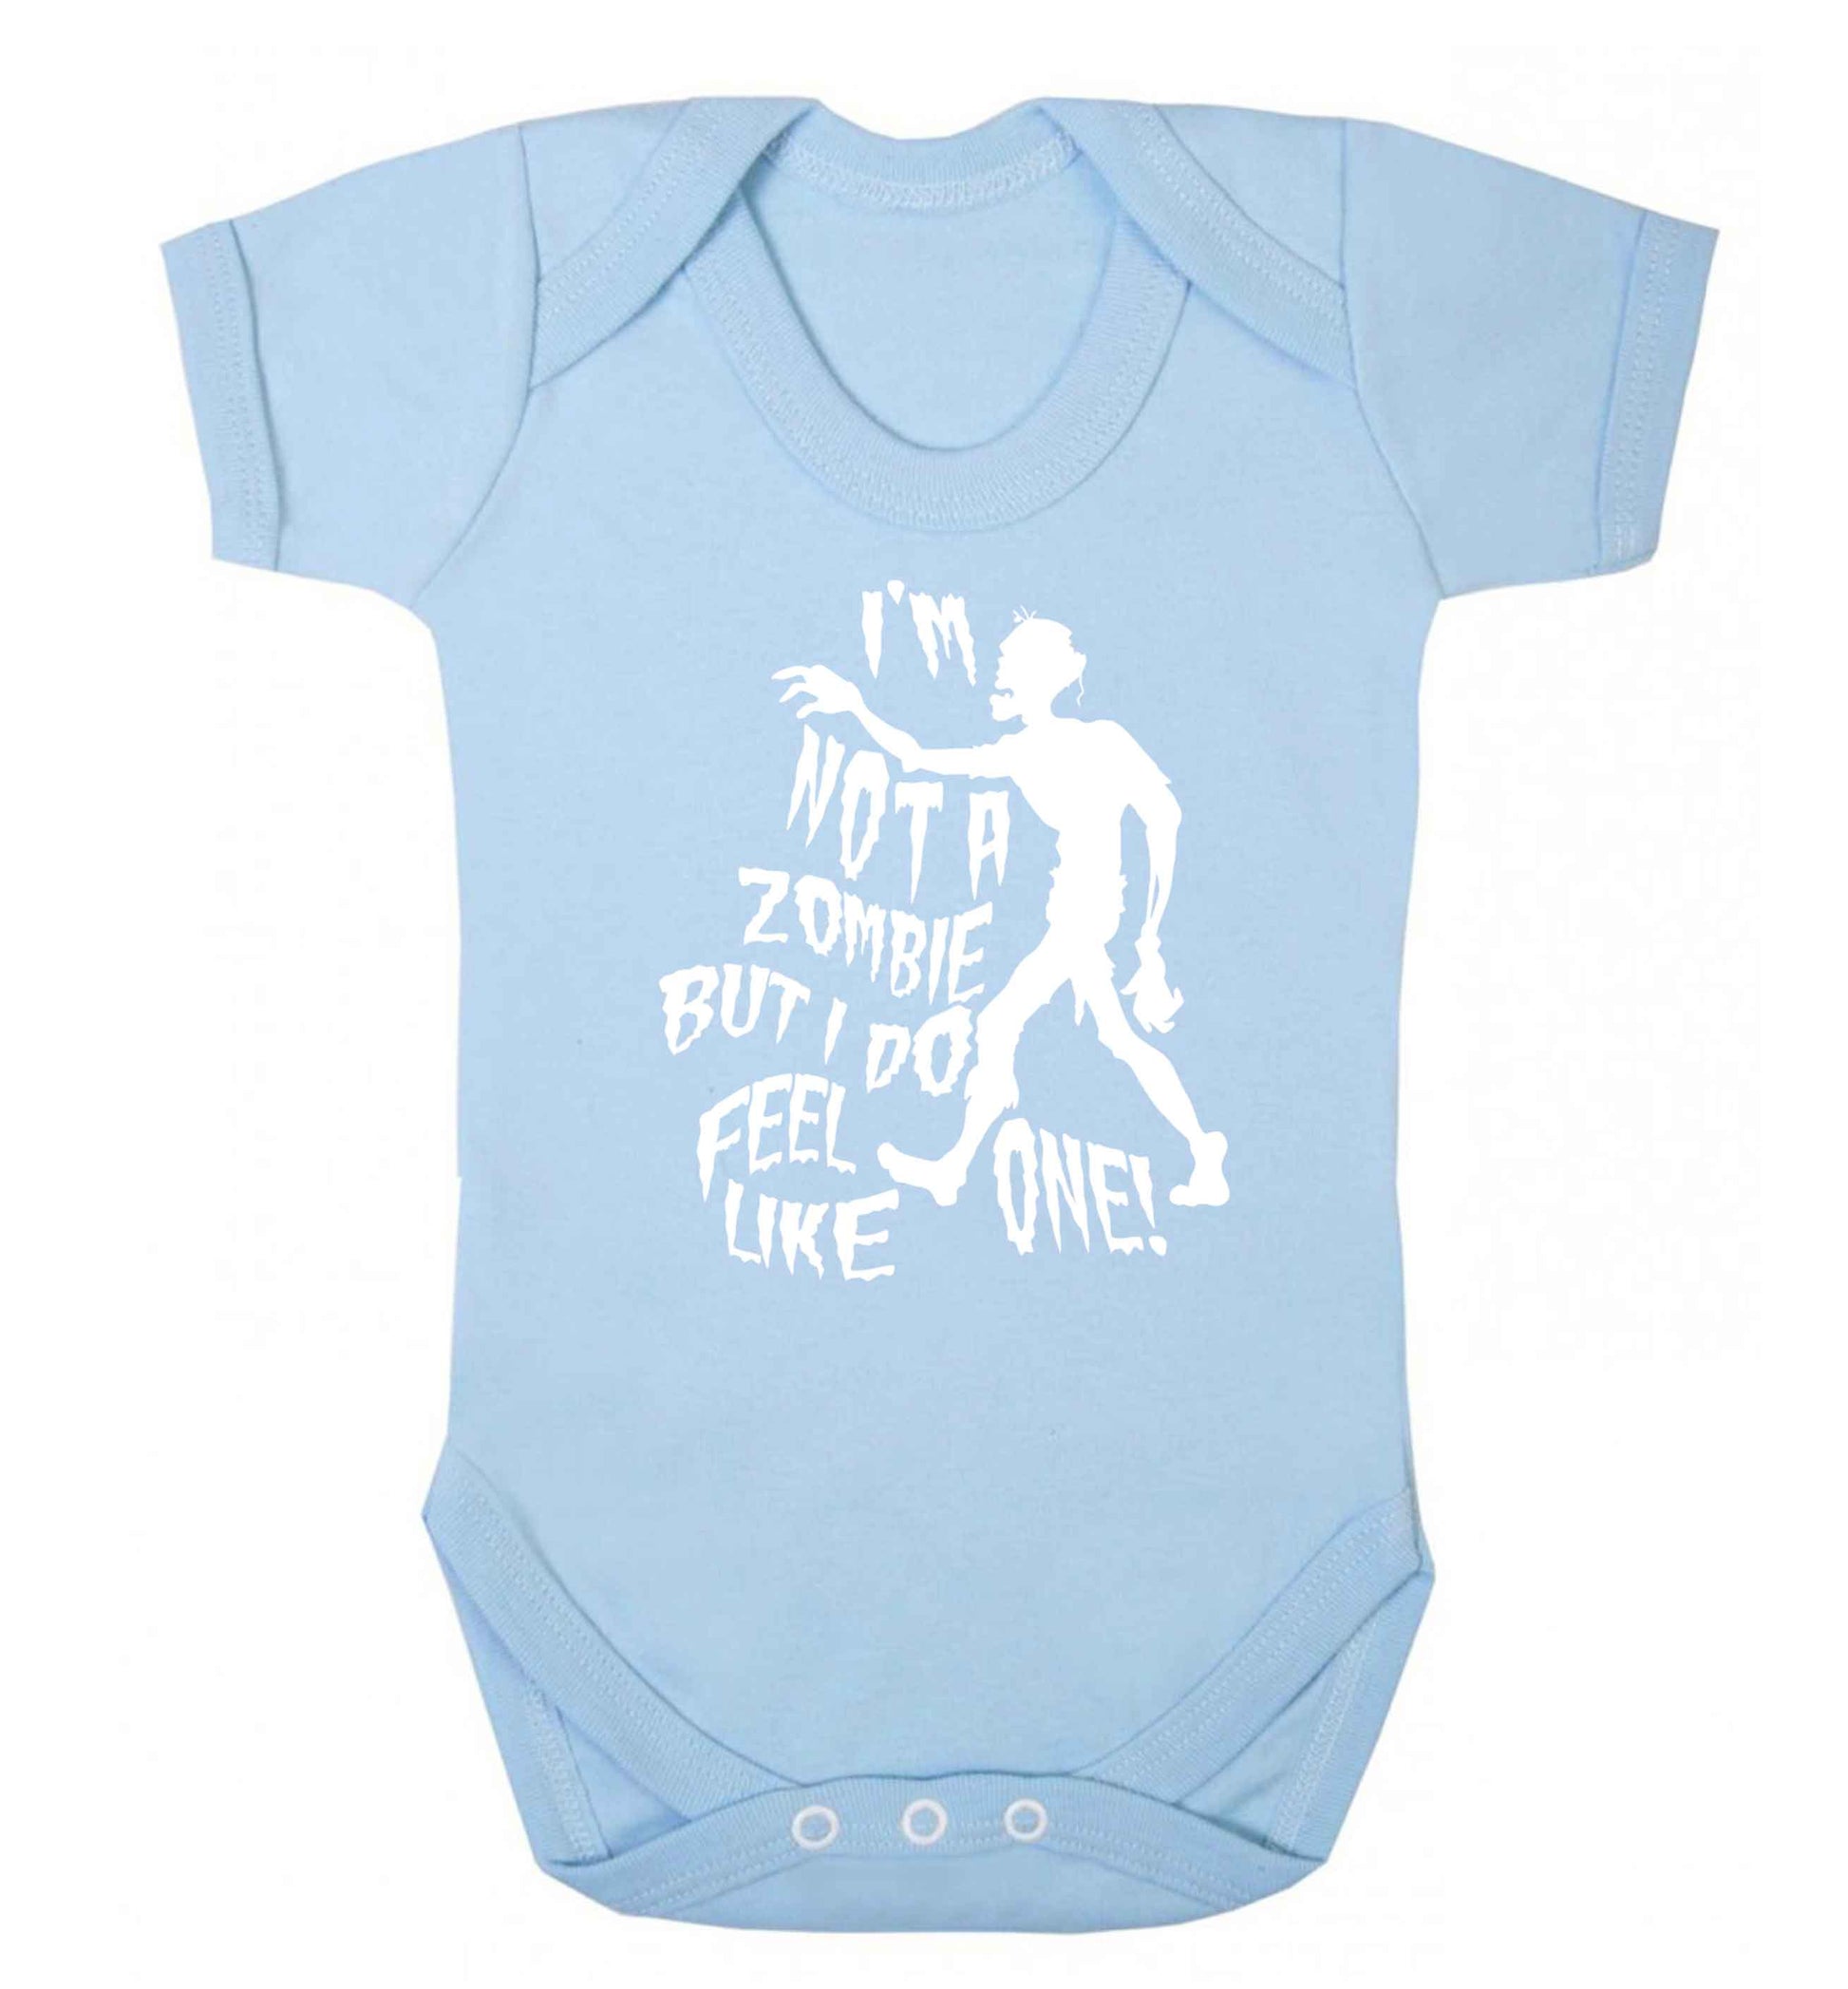 I'm not a zombie but I do feel like one! Baby Vest pale blue 18-24 months